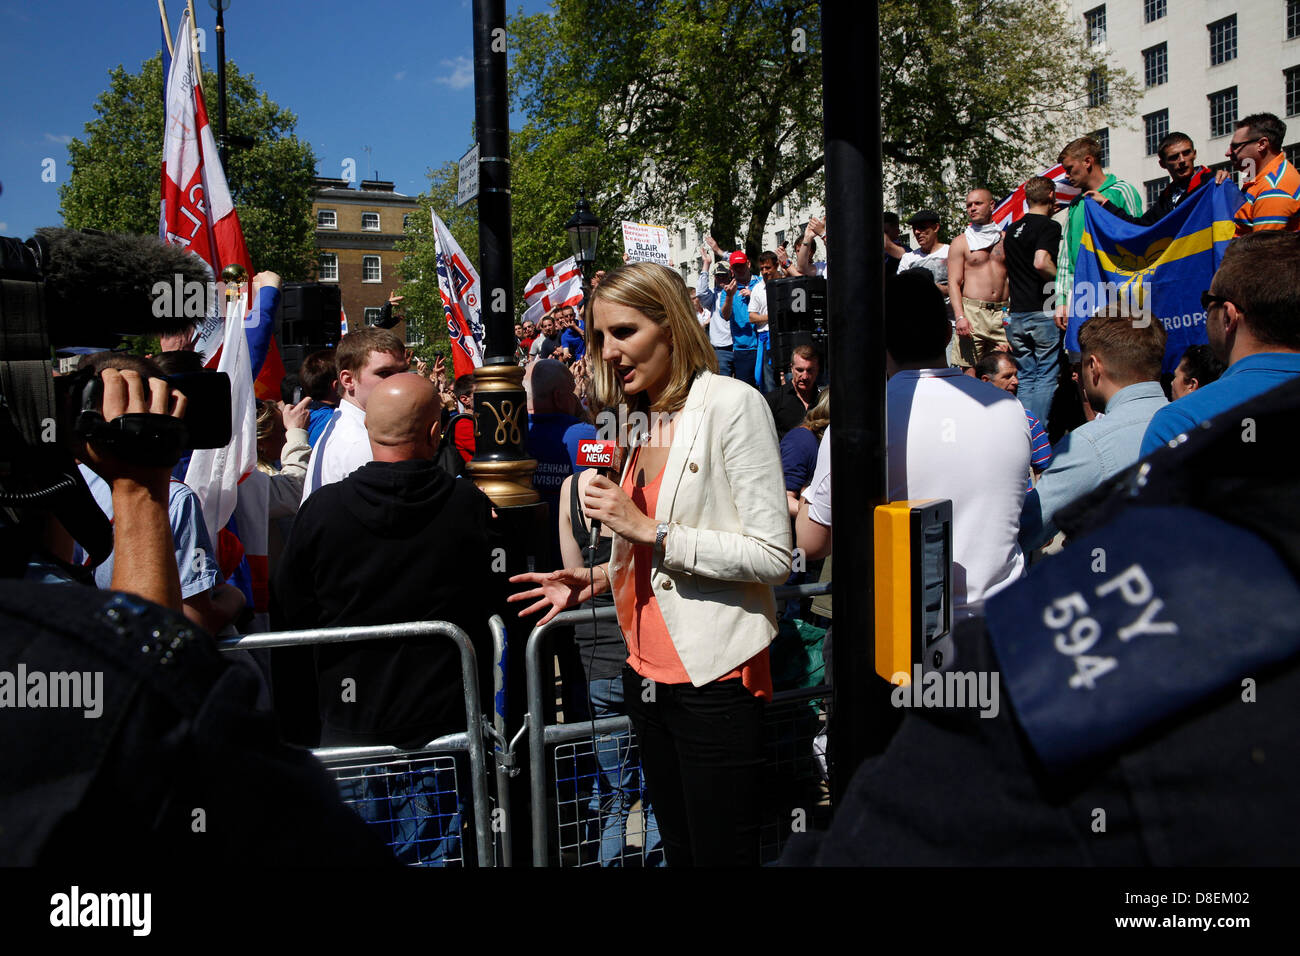 London, UK. 27th May, 2013. EDL marched to Downing street under strict police supervision while the UAF were holding a counter protest. Media outlets were attending in heavy numbers. Credit: Lydia Pagoni/Alamy Live News Stock Photo